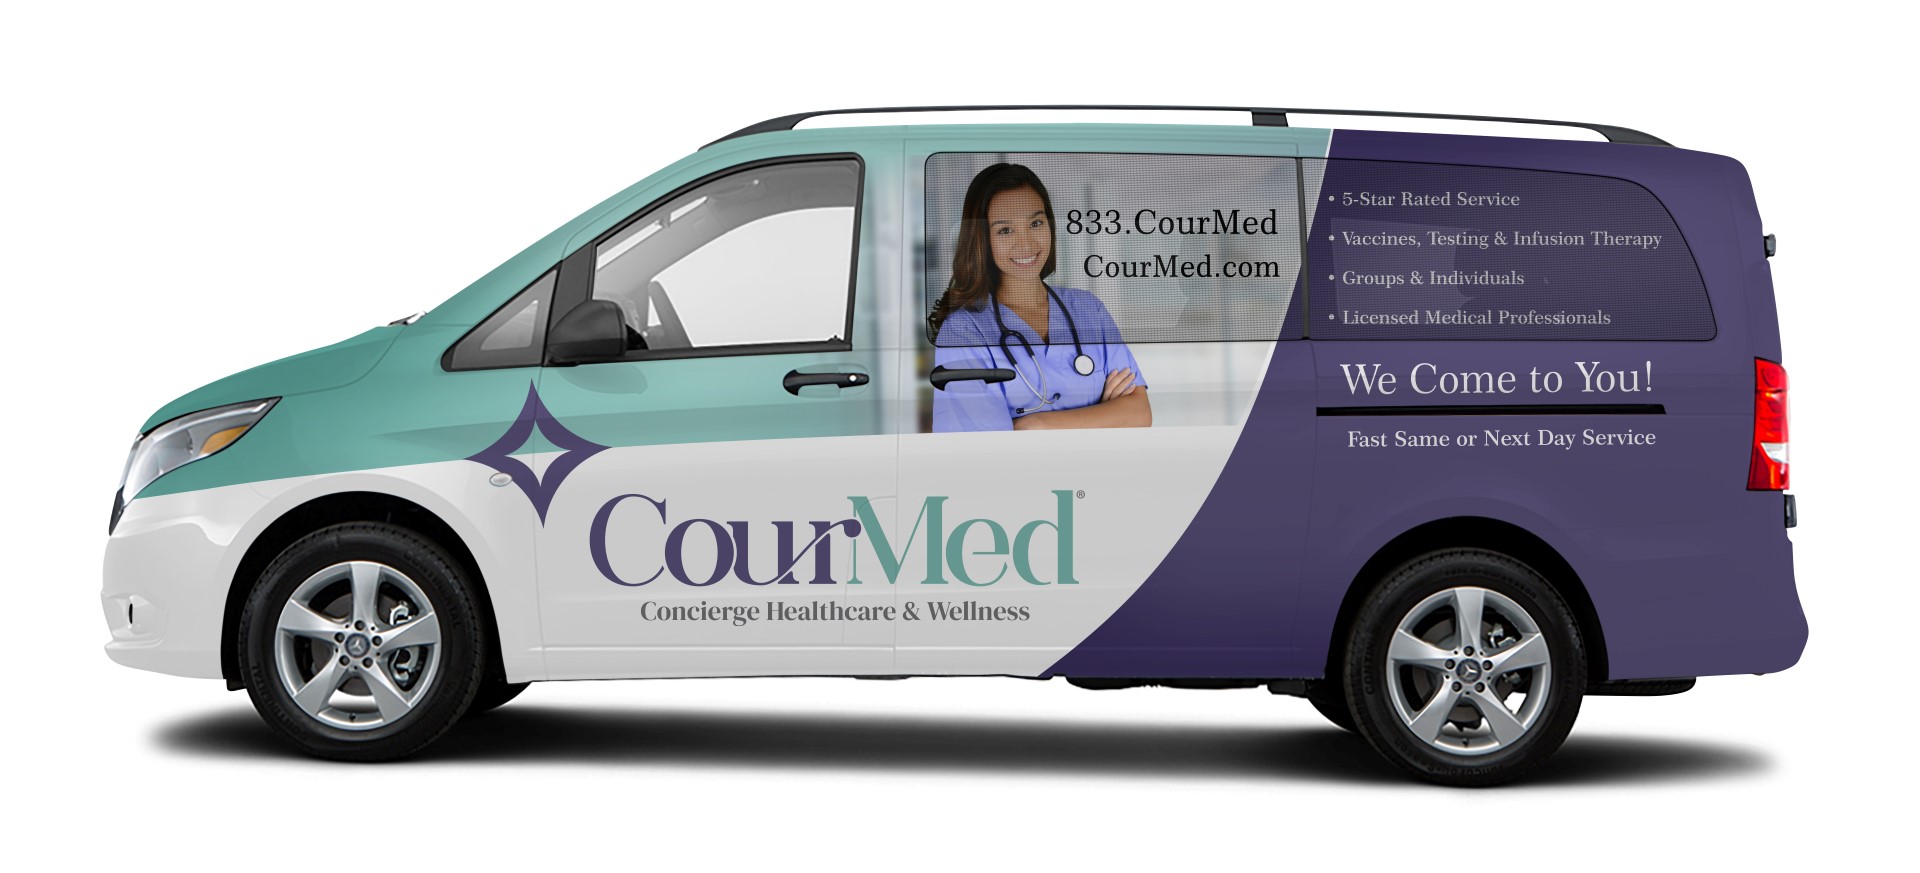 CourMed Concierge Healthcare & Wellness | We Come to You 